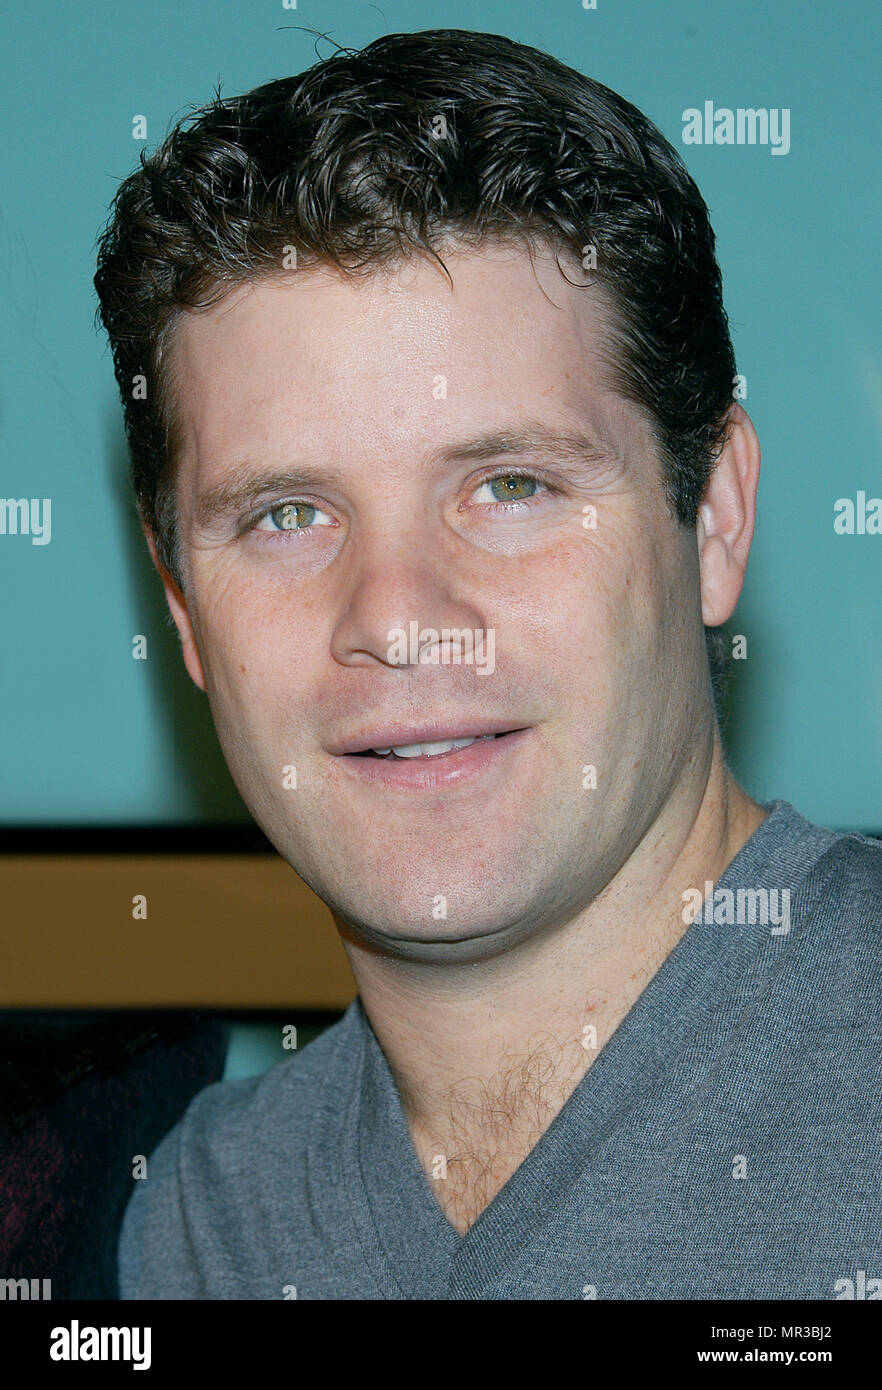 Sean Astin arriving at The premiere of 'The Lord Of The Rings: The Two Towers' at the Cineramadome Theatre in Los Angeles. December 15, 2002.AstinSean67 Red Carpet Event, Vertical, USA, Film Industry, Celebrities,  Photography, Bestof, Arts Culture and Entertainment, Topix Celebrities fashion /  Vertical, Best of, Event in Hollywood Life - California,  Red Carpet and backstage, USA, Film Industry, Celebrities,  movie celebrities, TV celebrities, Music celebrities, Photography, Bestof, Arts Culture and Entertainment,  Topix, headshot, vertical, one person,, from the year , 2002, inquiry tsuni@G Stock Photo